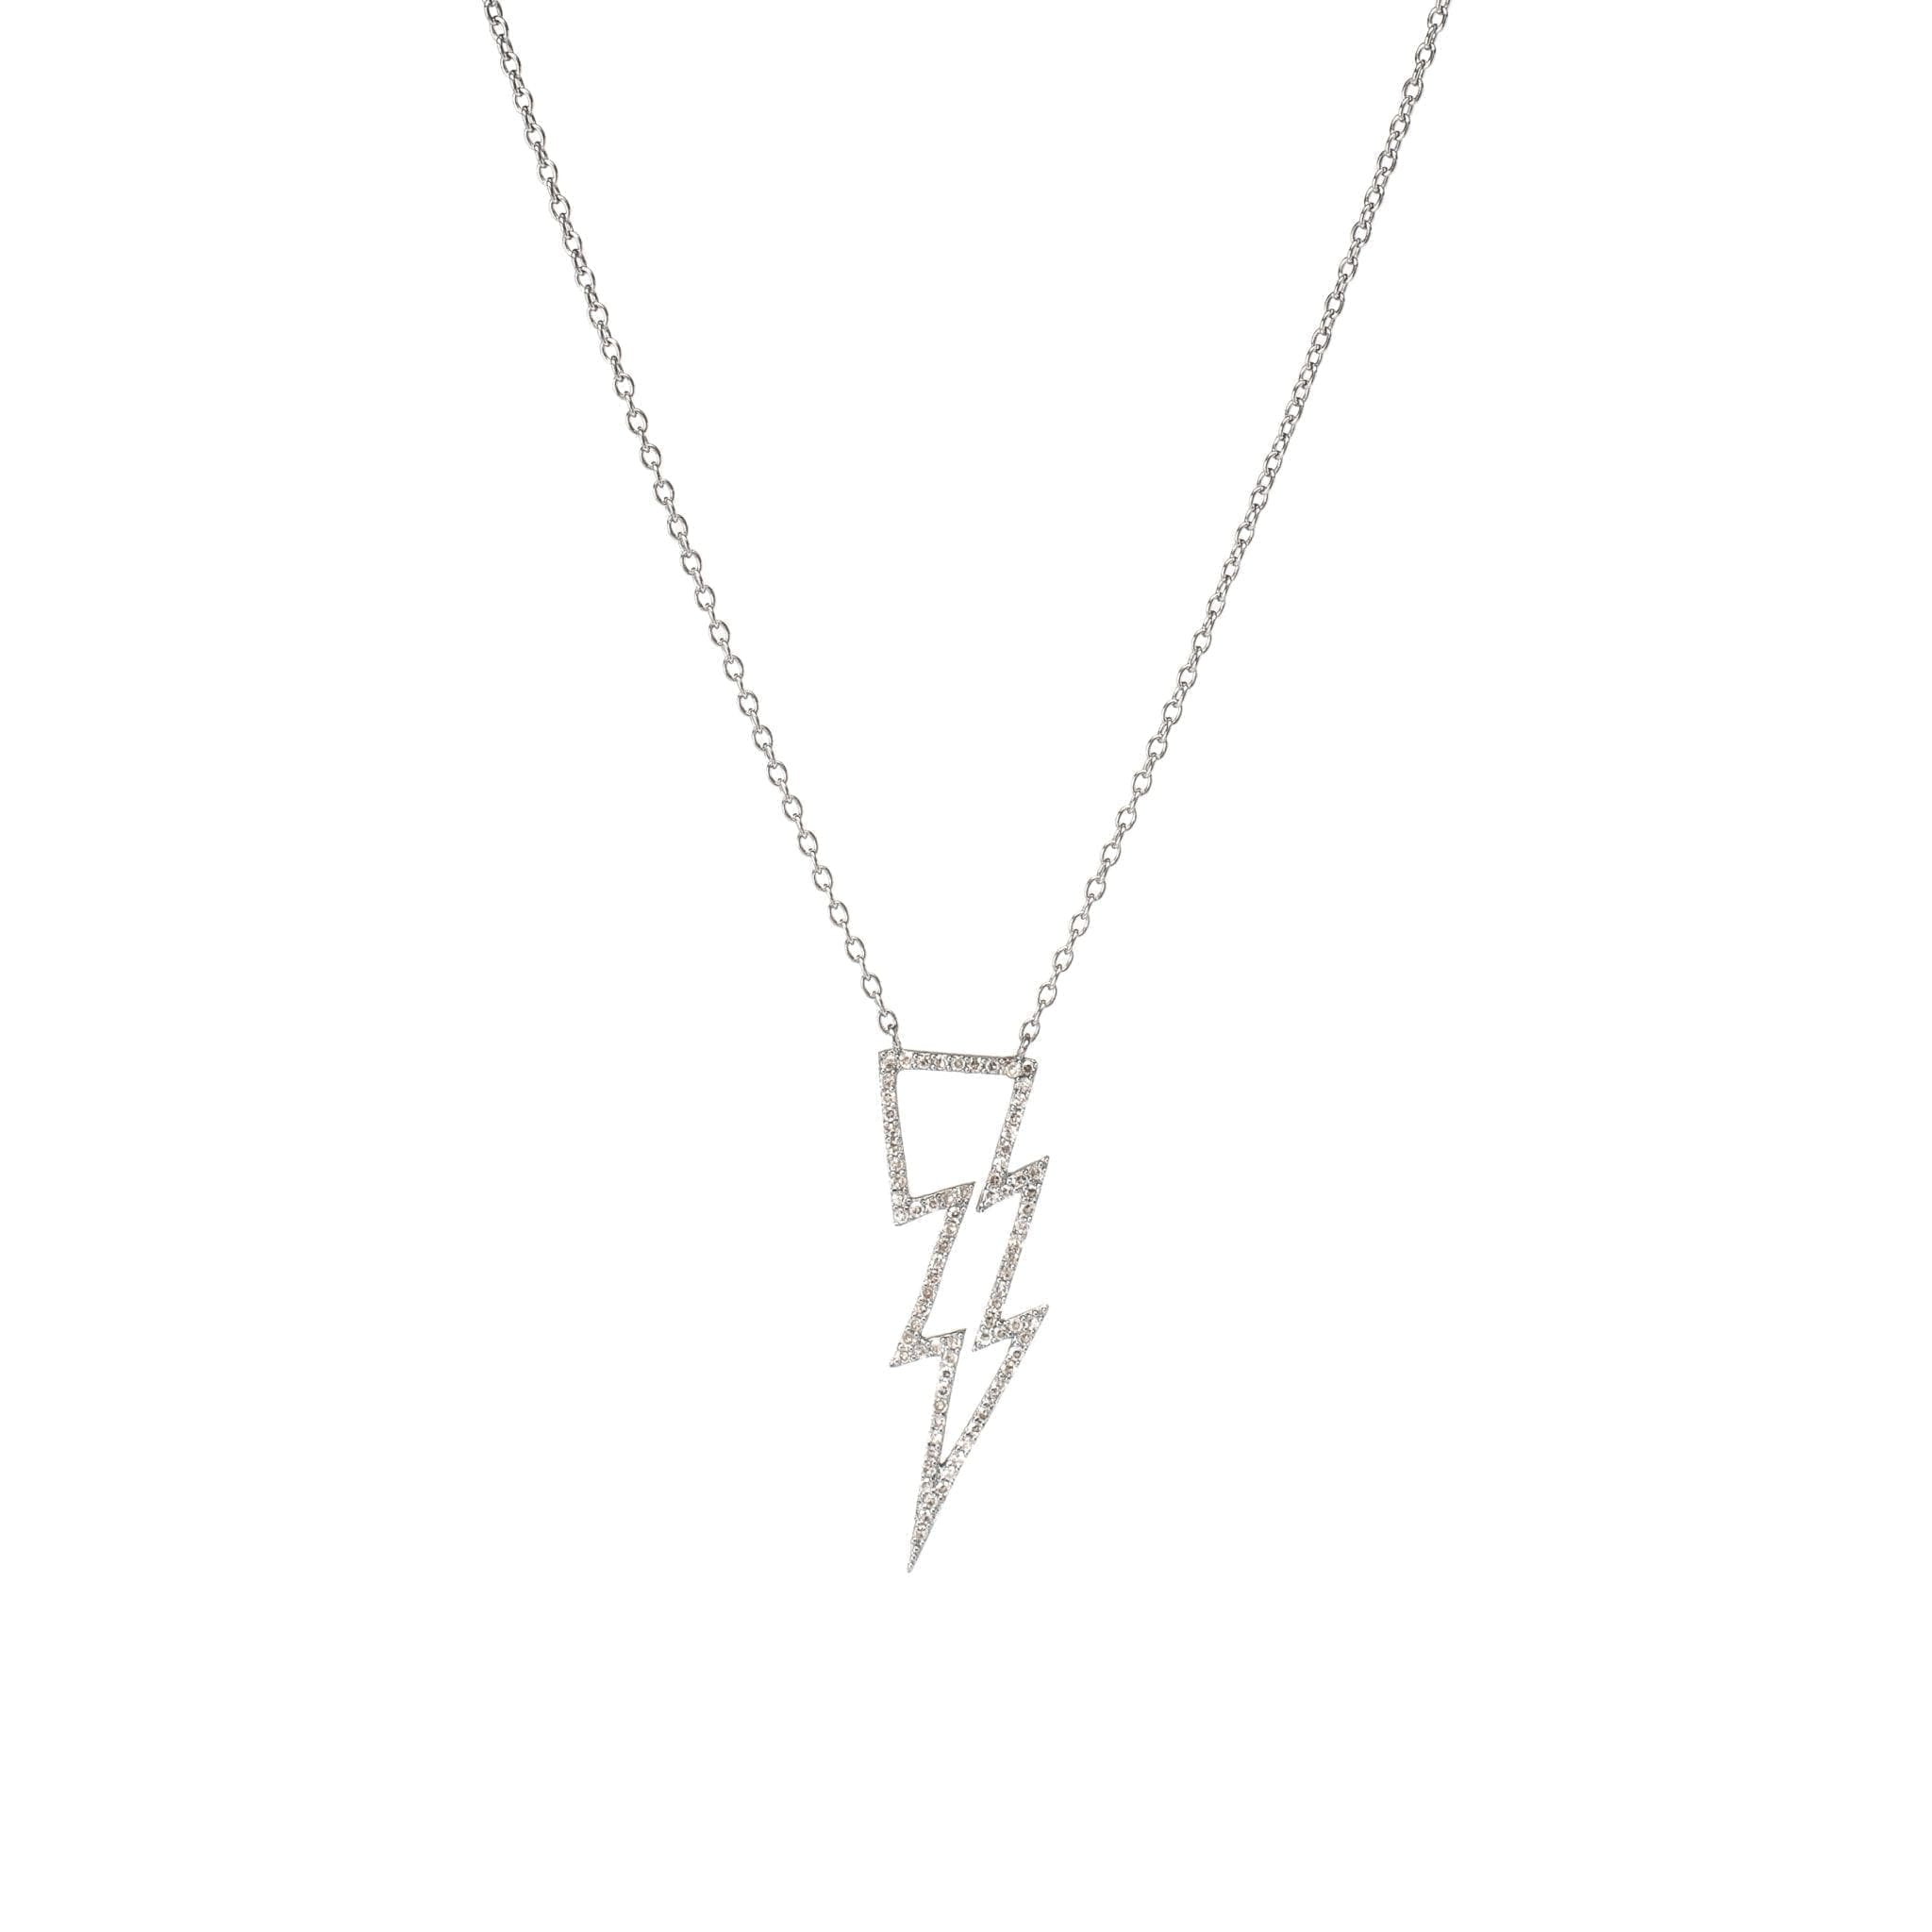 Urban Outfitters Lightning Bolt Pendant Necklace in Metallic for Men | Lyst